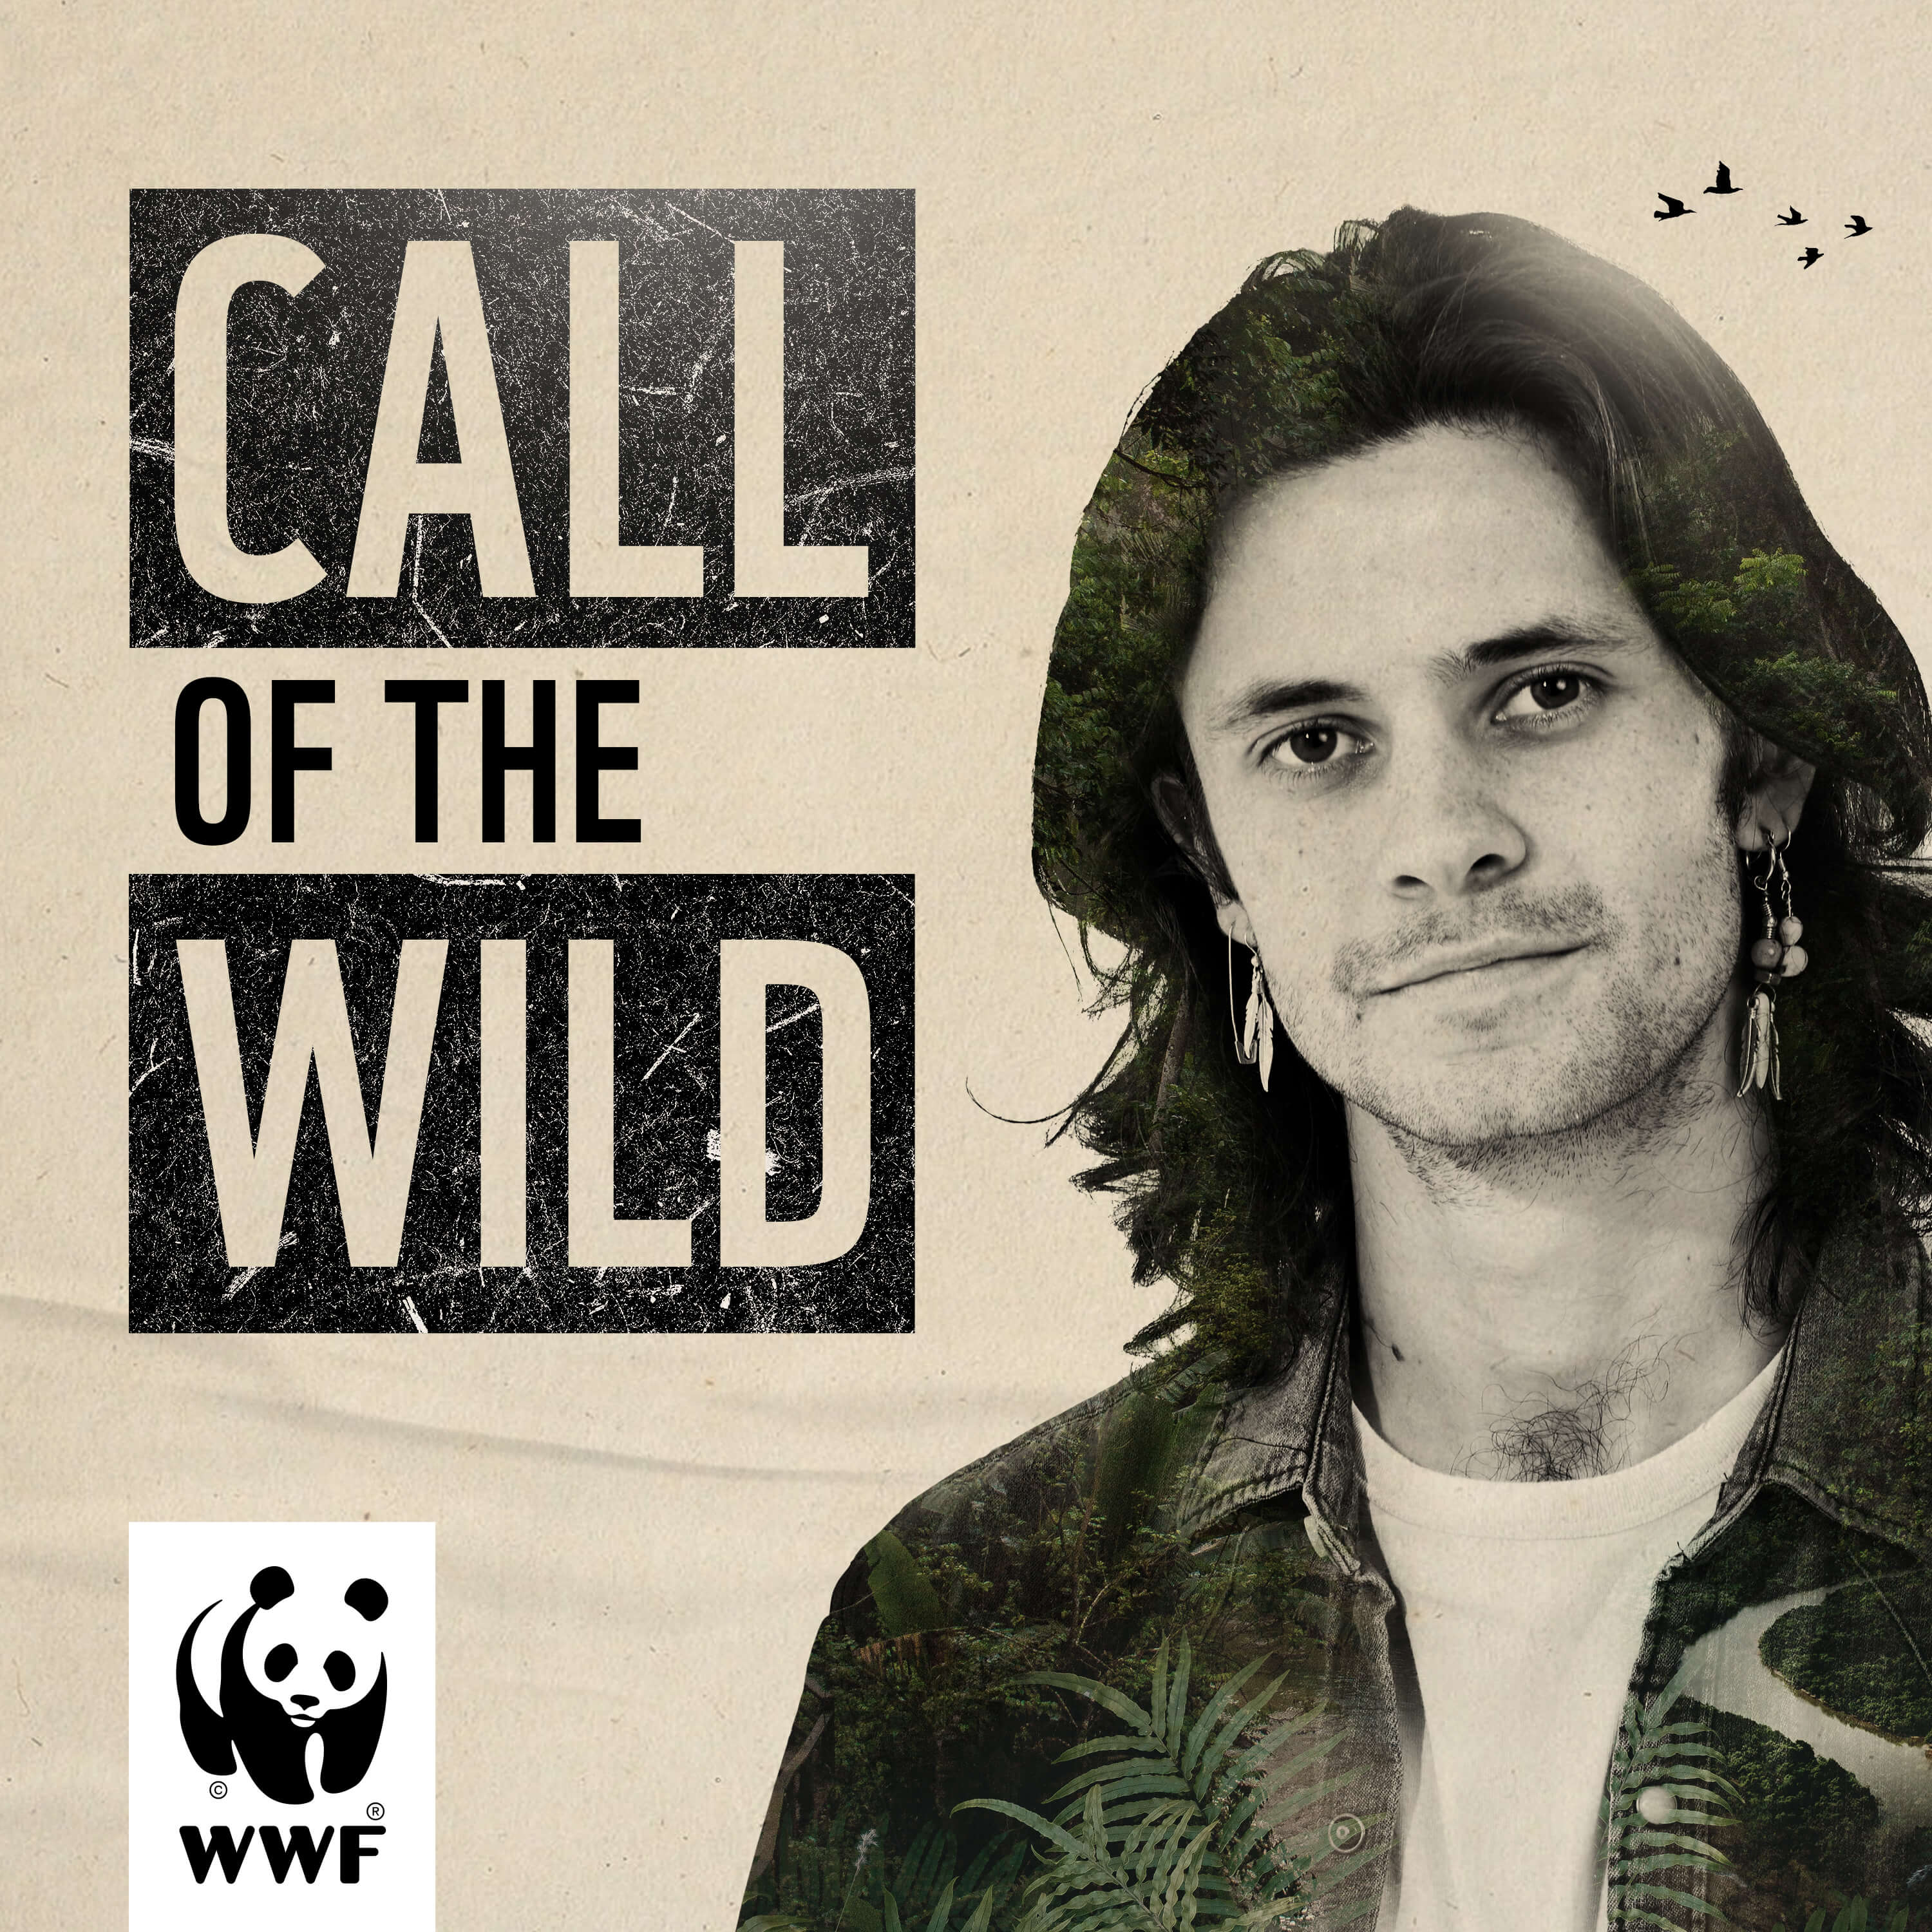 Reaching young audiences, with WWF